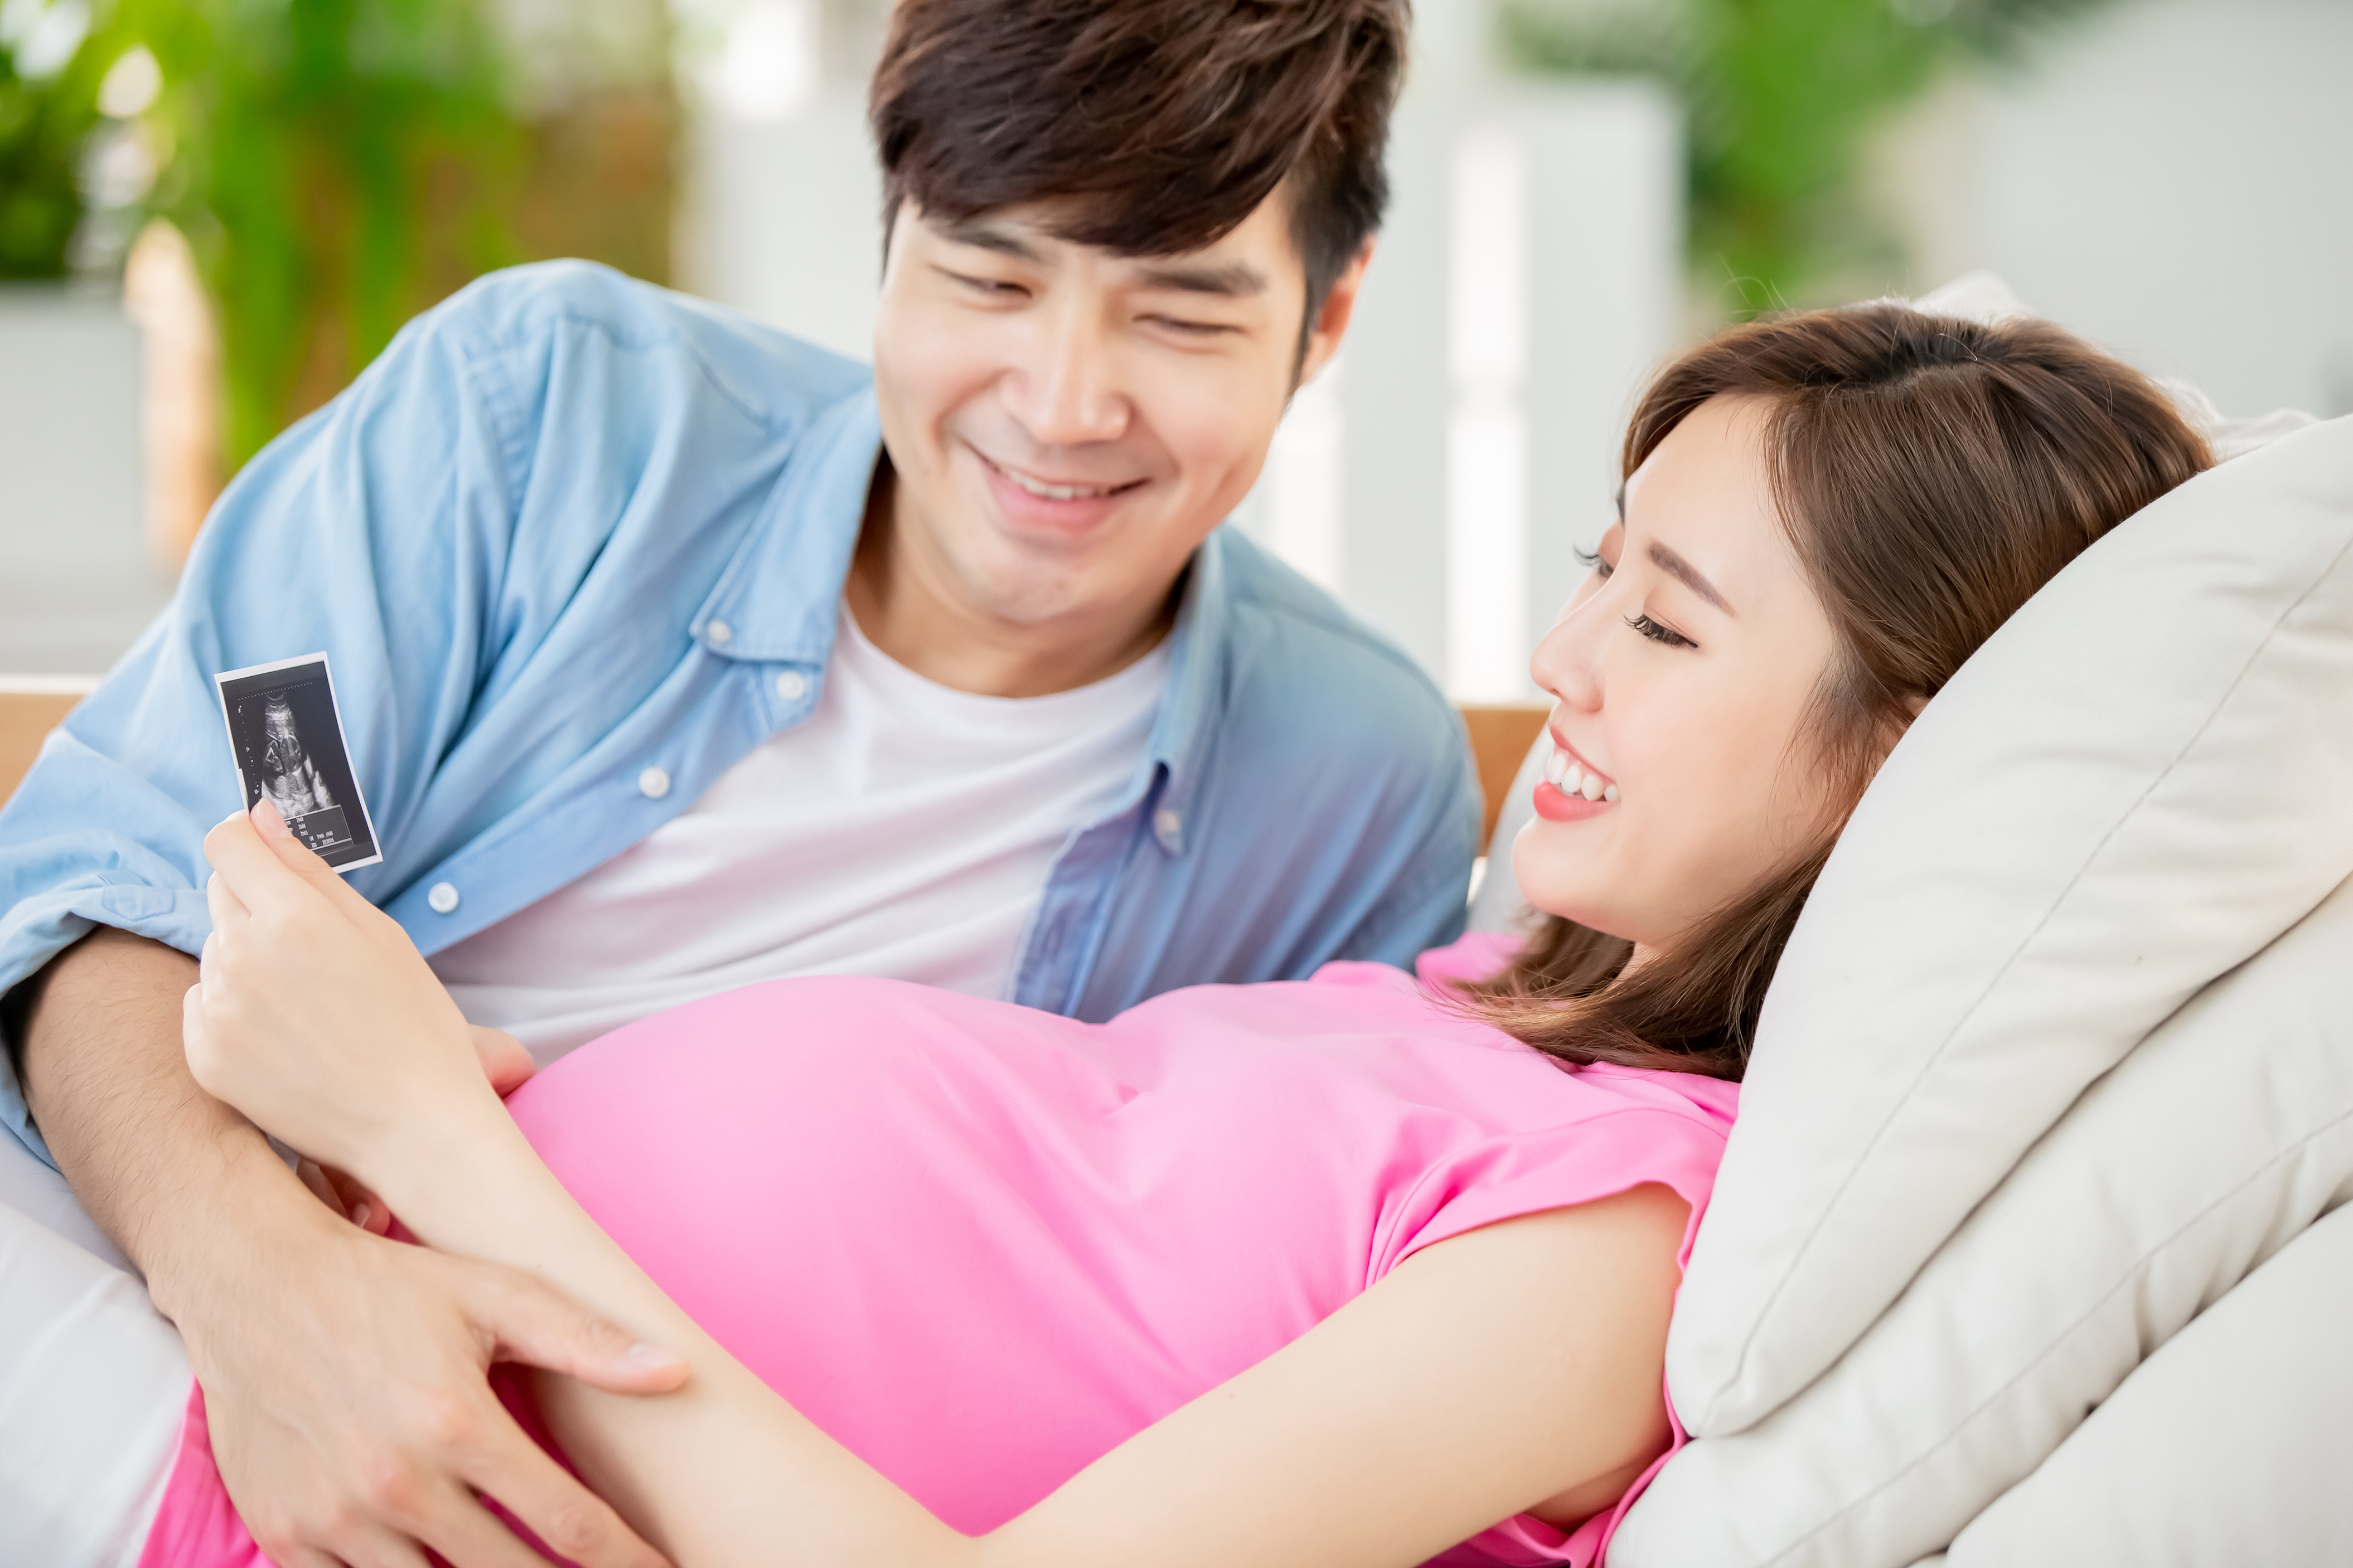 Relevant Tips for a Good Prenatal Care